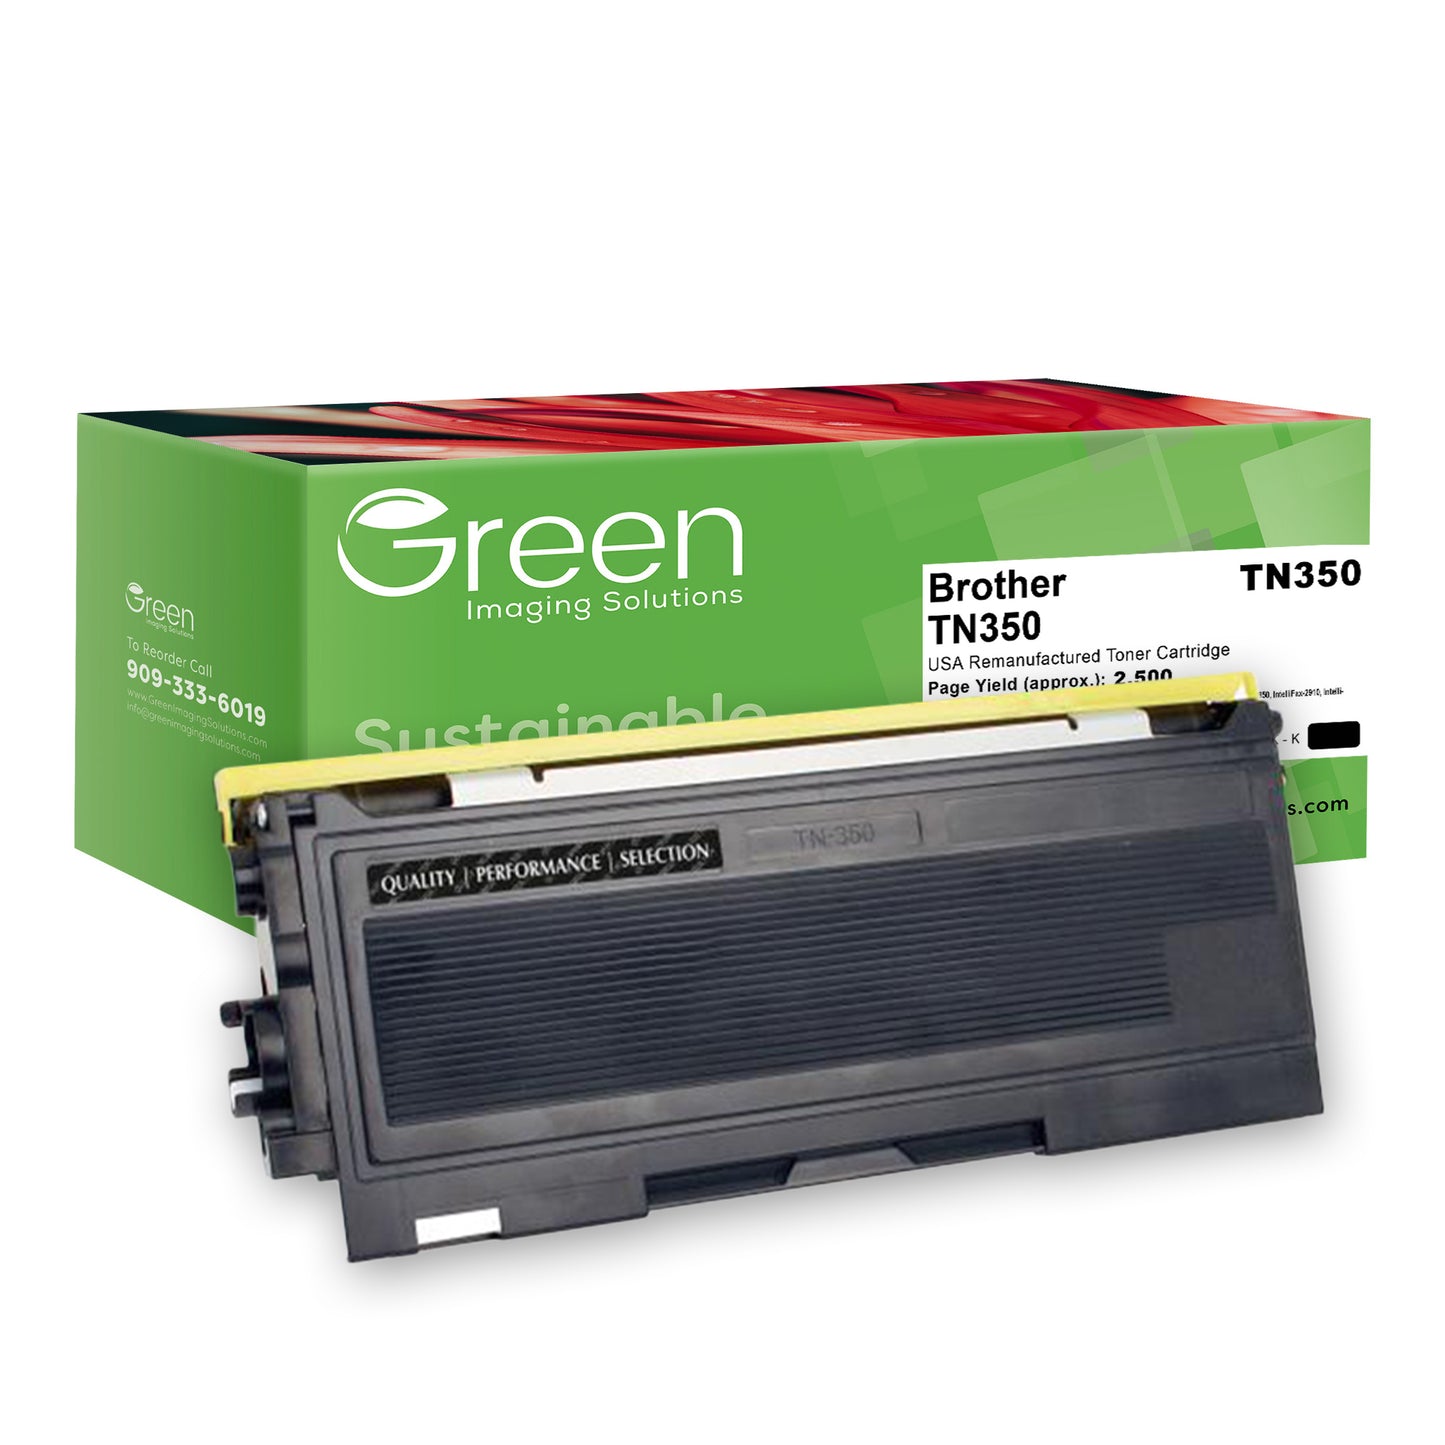 Green Imaging Solutions USA Remanufactured Toner Cartridge for Brother TN350